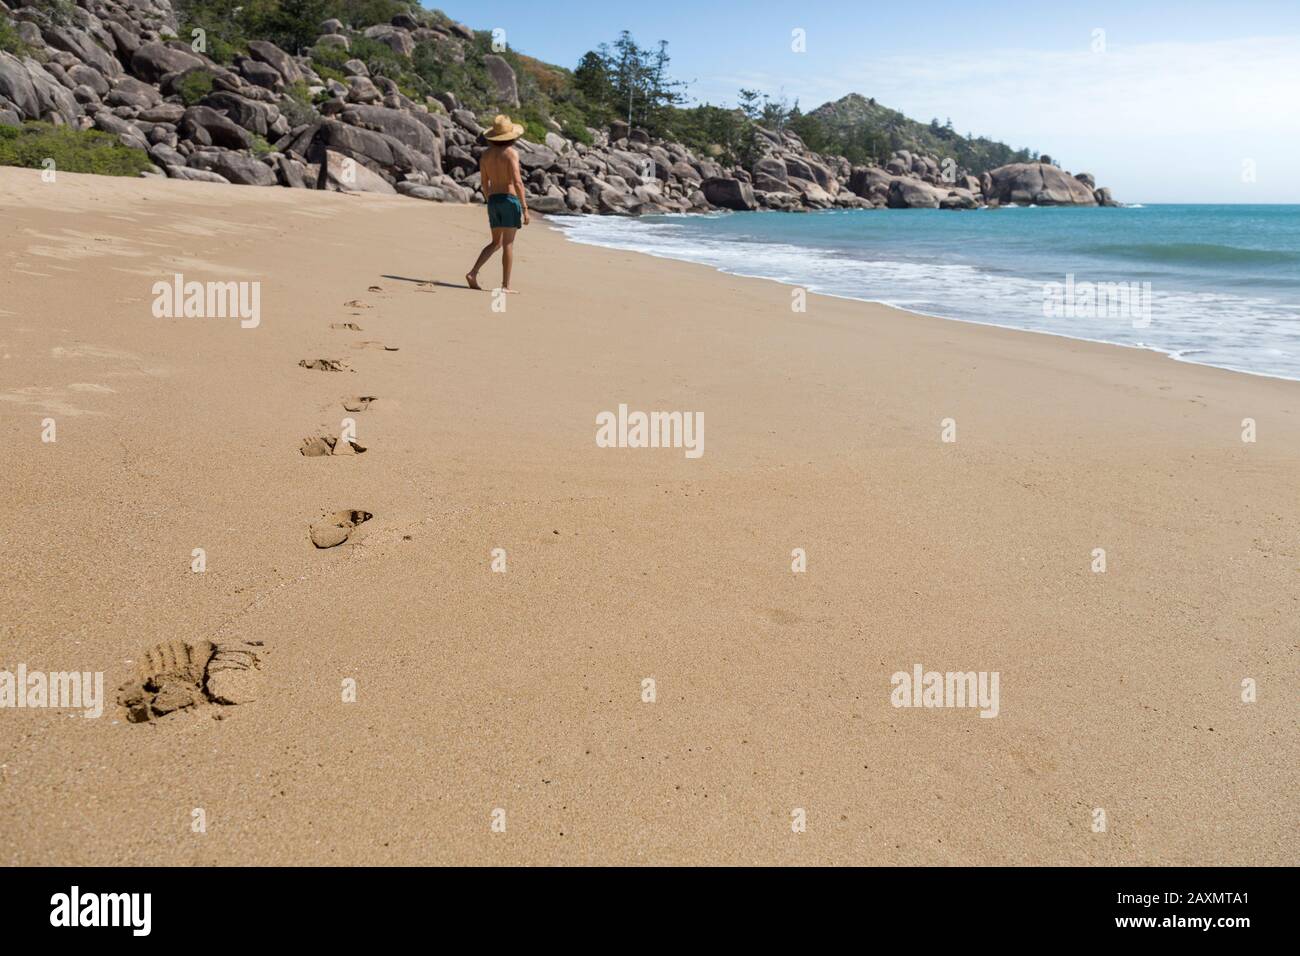 Footprints on sand left by male tourist wearing hat and green shorts Stock Photo